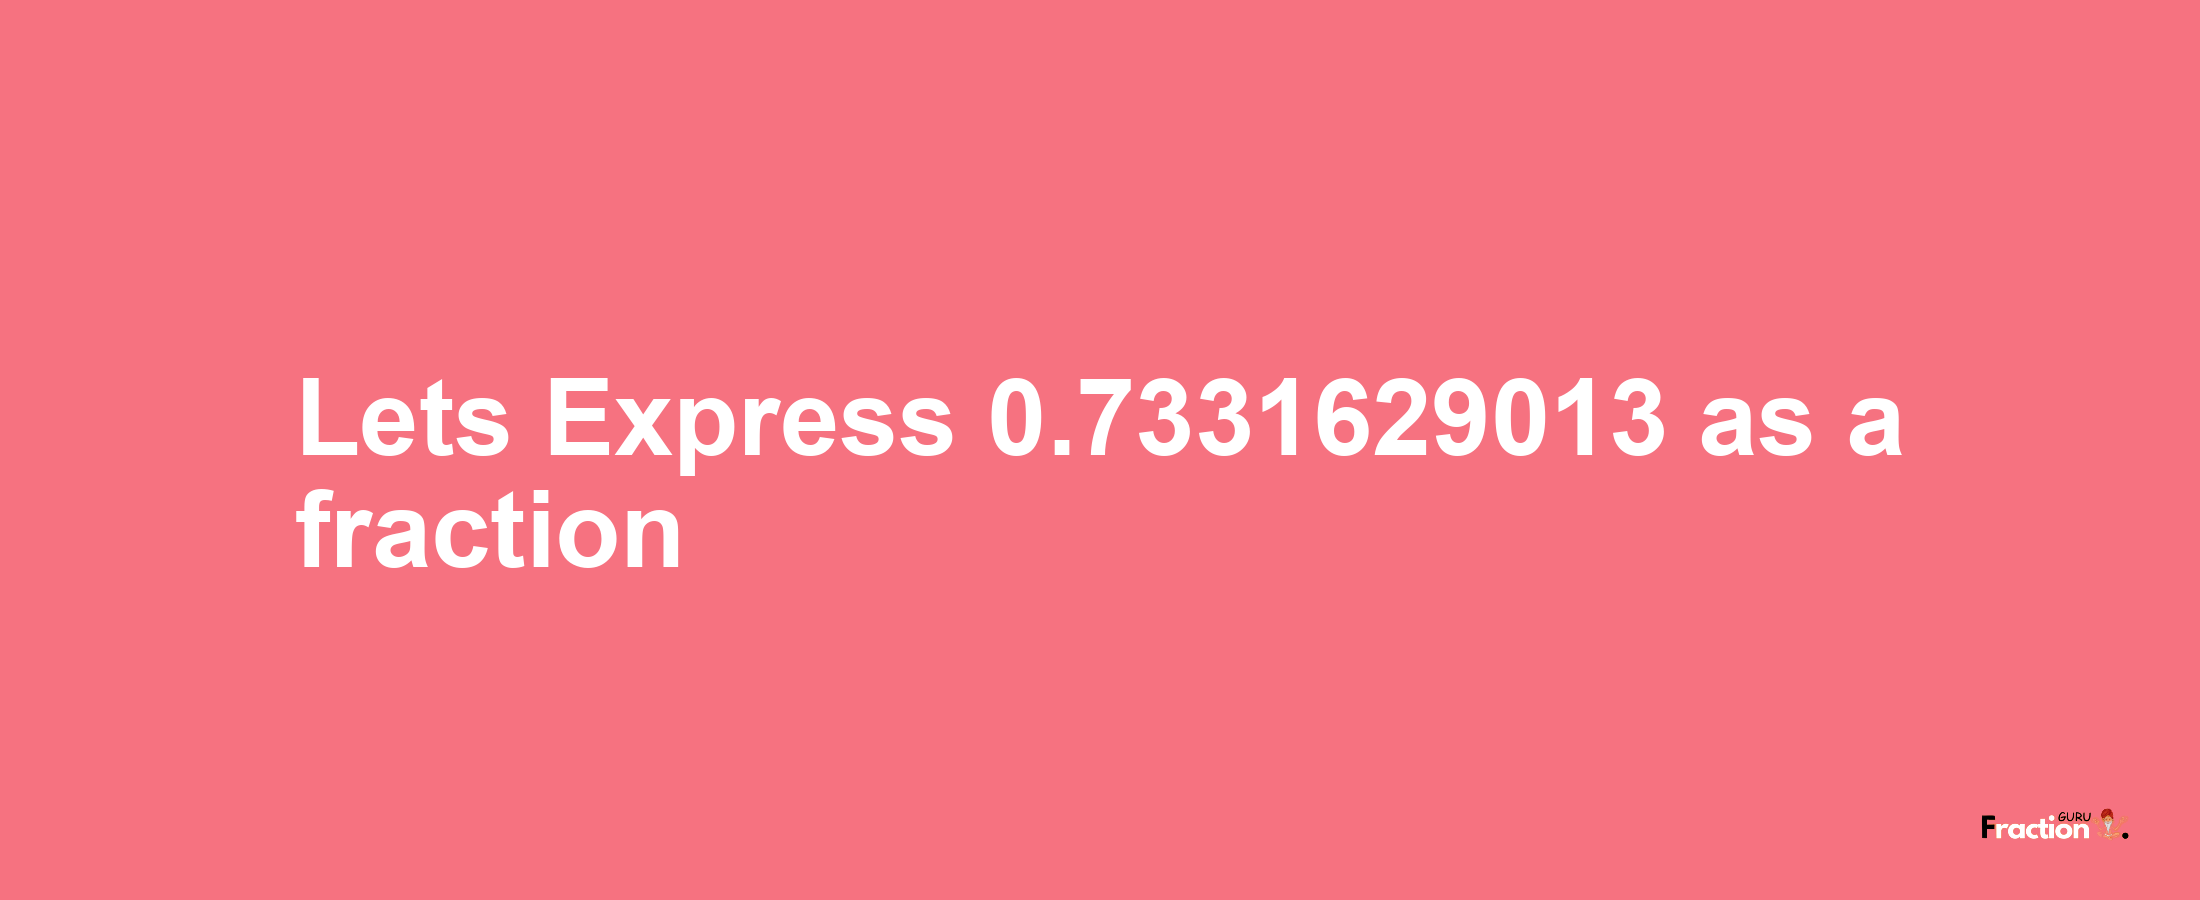 Lets Express 0.7331629013 as afraction